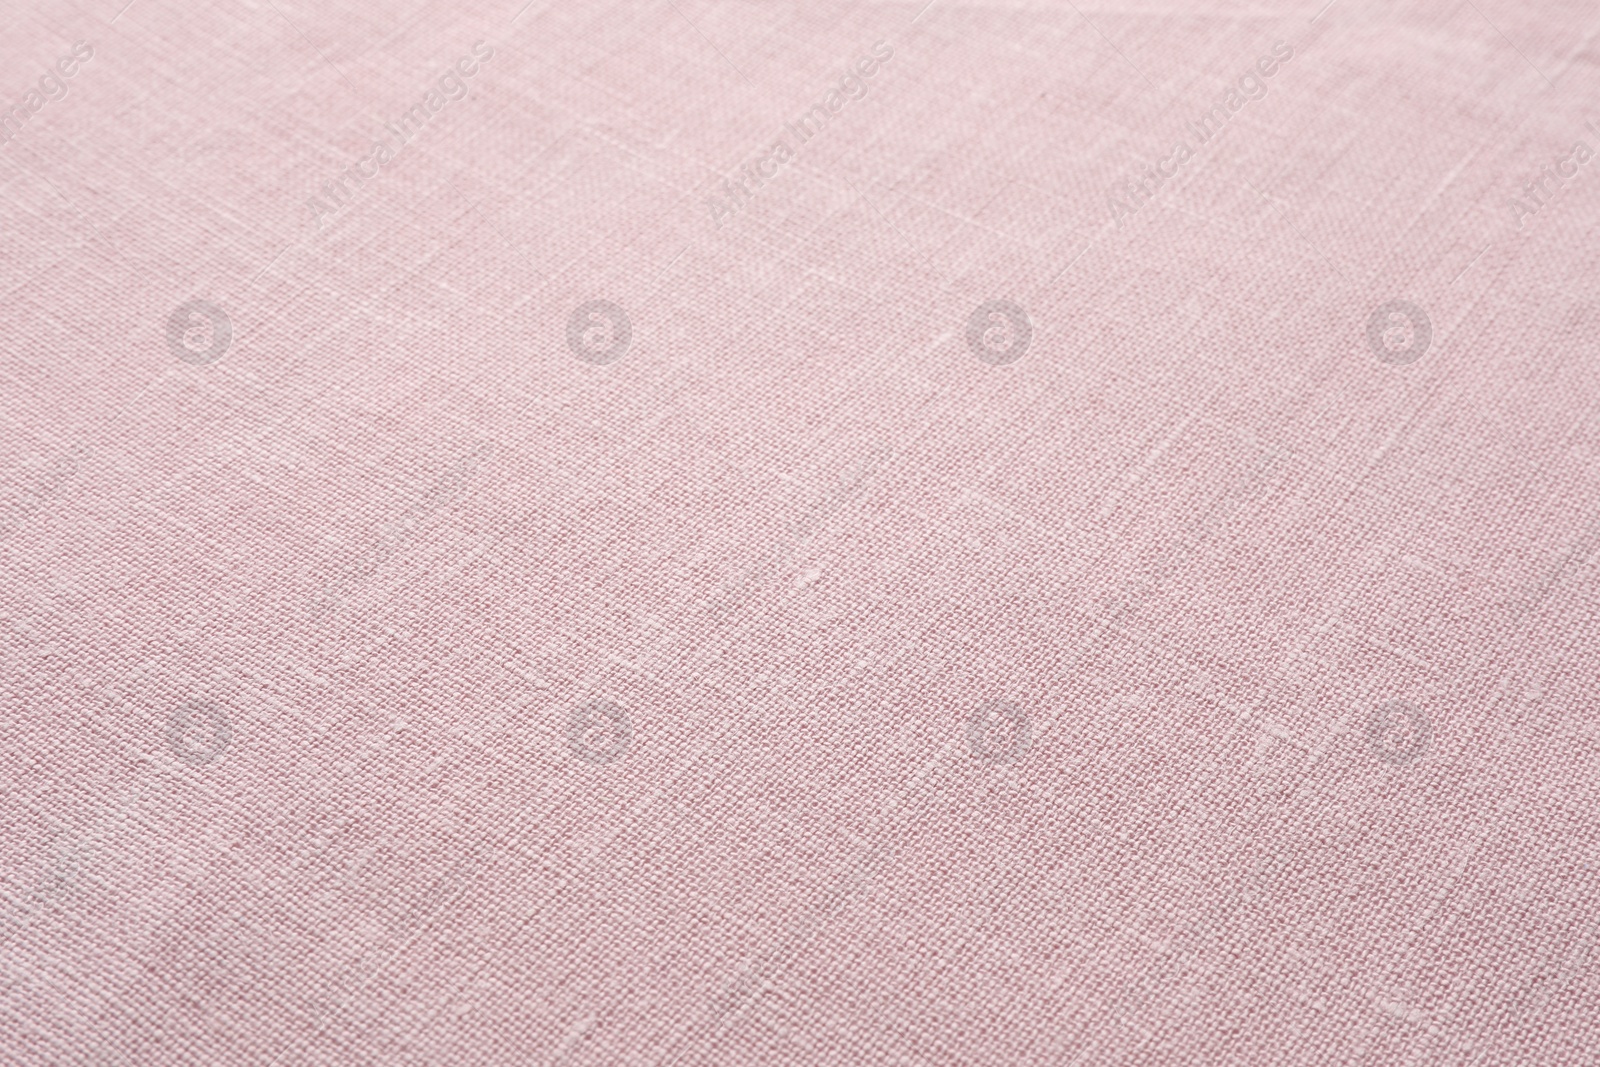 Photo of Texture of pink fabric as background, closeup